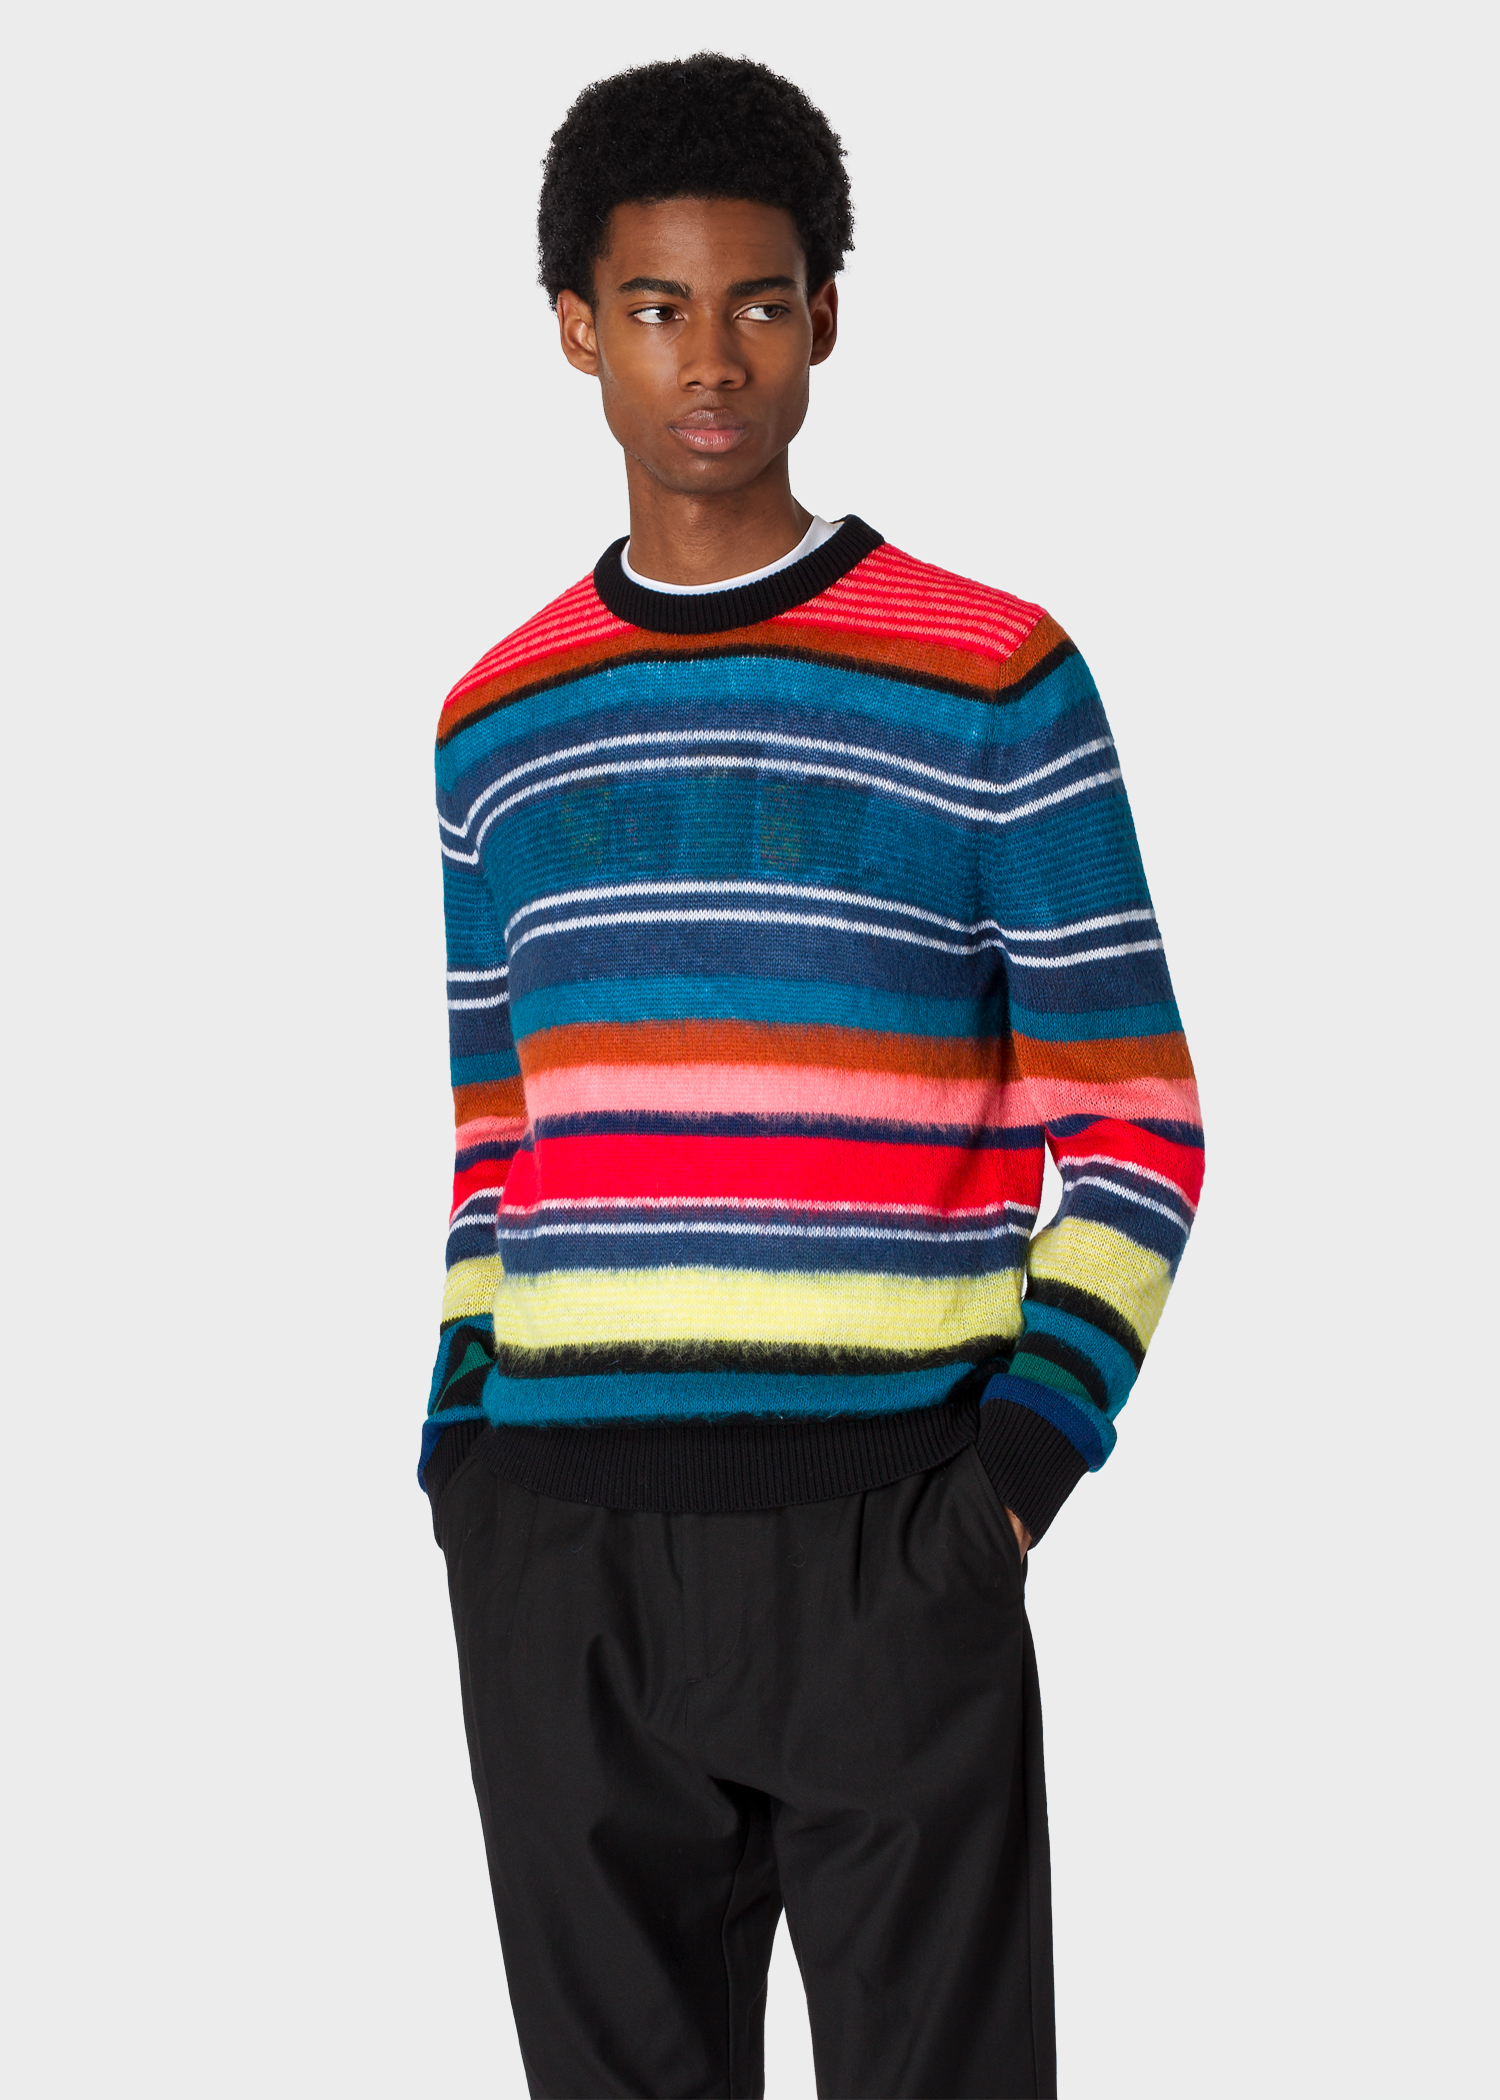 Model front close up - Men's Multi-Colour Striped Wool-Blend Sweater Paul Smith